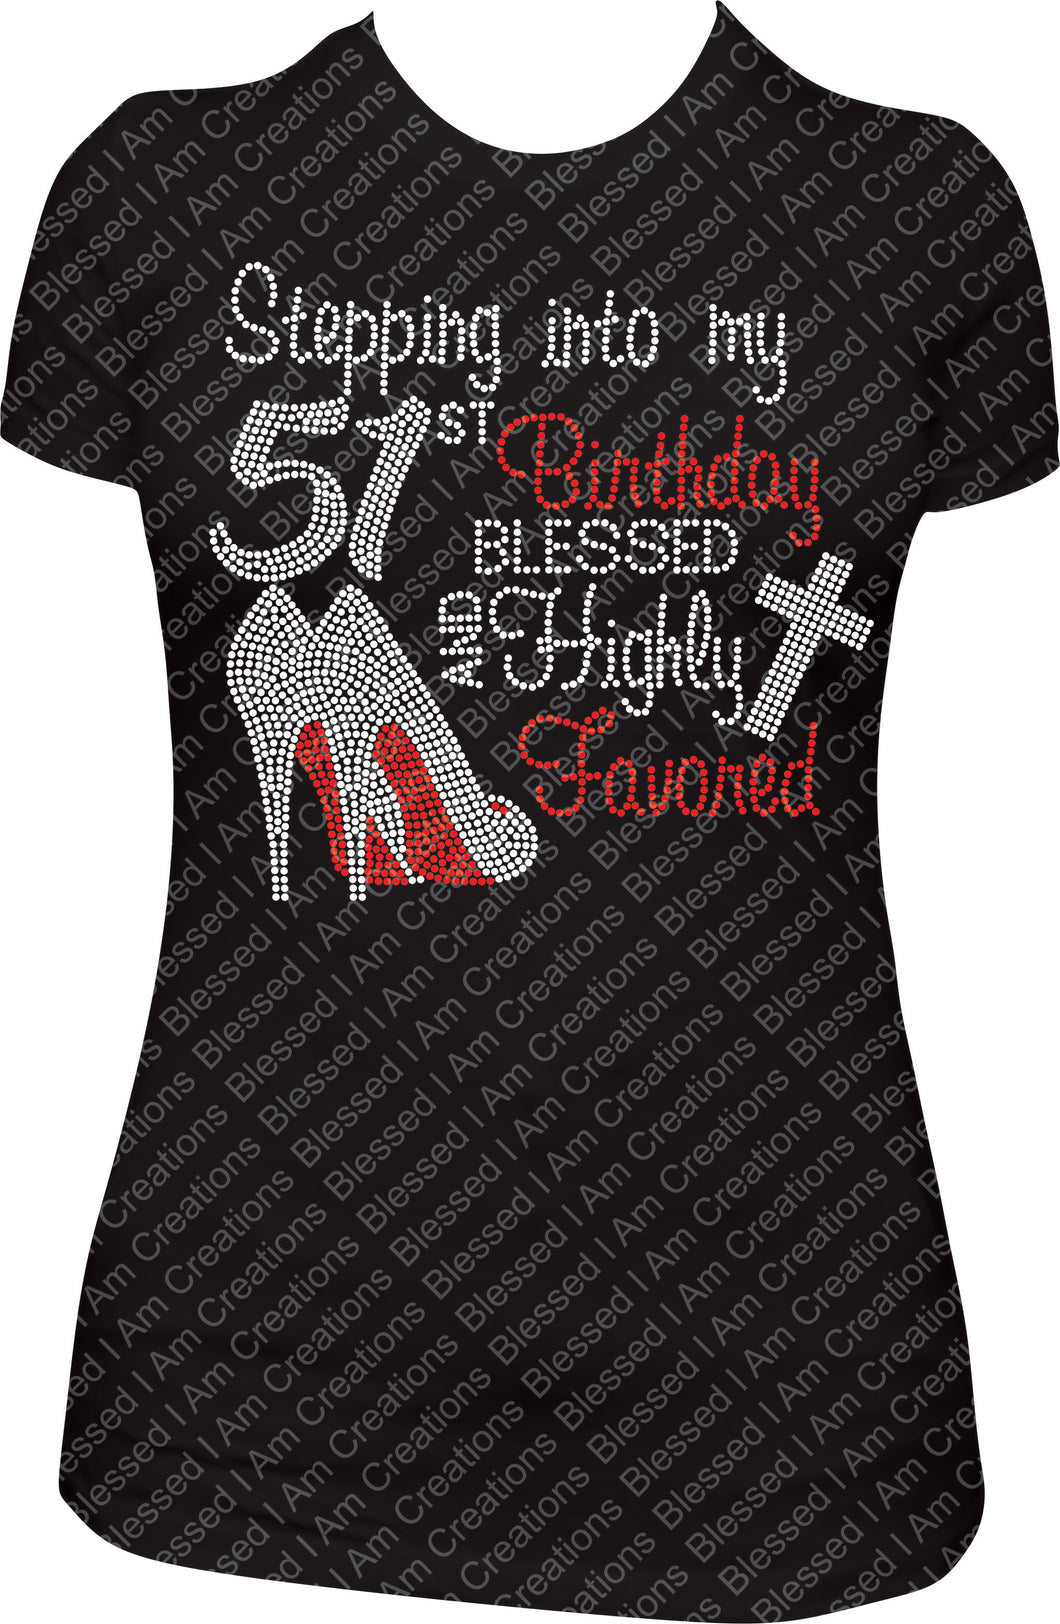 Stepping into my 51st Birthday Blessed and Highly Favored Rhinestone Birthday Shirt